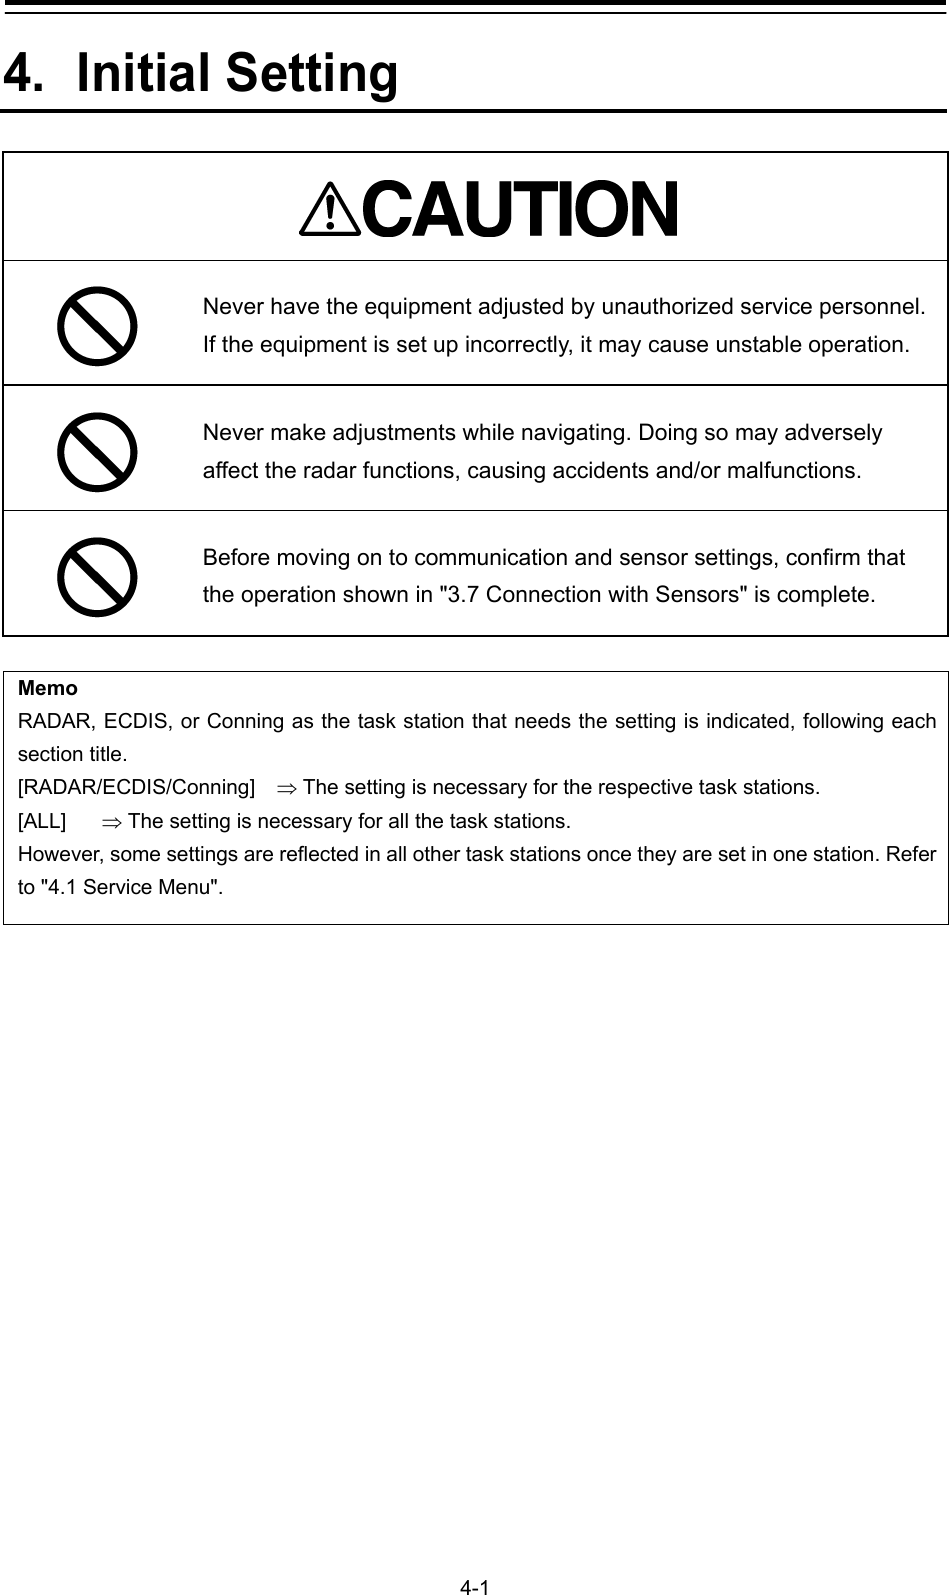   4-1 4. Initial Setting   Never have the equipment adjusted by unauthorized service personnel. If the equipment is set up incorrectly, it may cause unstable operation.  Never make adjustments while navigating. Doing so may adversely affect the radar functions, causing accidents and/or malfunctions.    Before moving on to communication and sensor settings, confirm that the operation shown in &quot;3.7 Connection with Sensors&quot; is complete.  Memo RADAR, ECDIS, or Conning as the task station that needs the setting is indicated, following each section title. [RADAR/ECDIS/Conning]   The setting is necessary for the respective task stations. [ALL]   The setting is necessary for all the task stations. However, some settings are reflected in all other task stations once they are set in one station. Refer to &quot;4.1 Service Menu&quot;.    